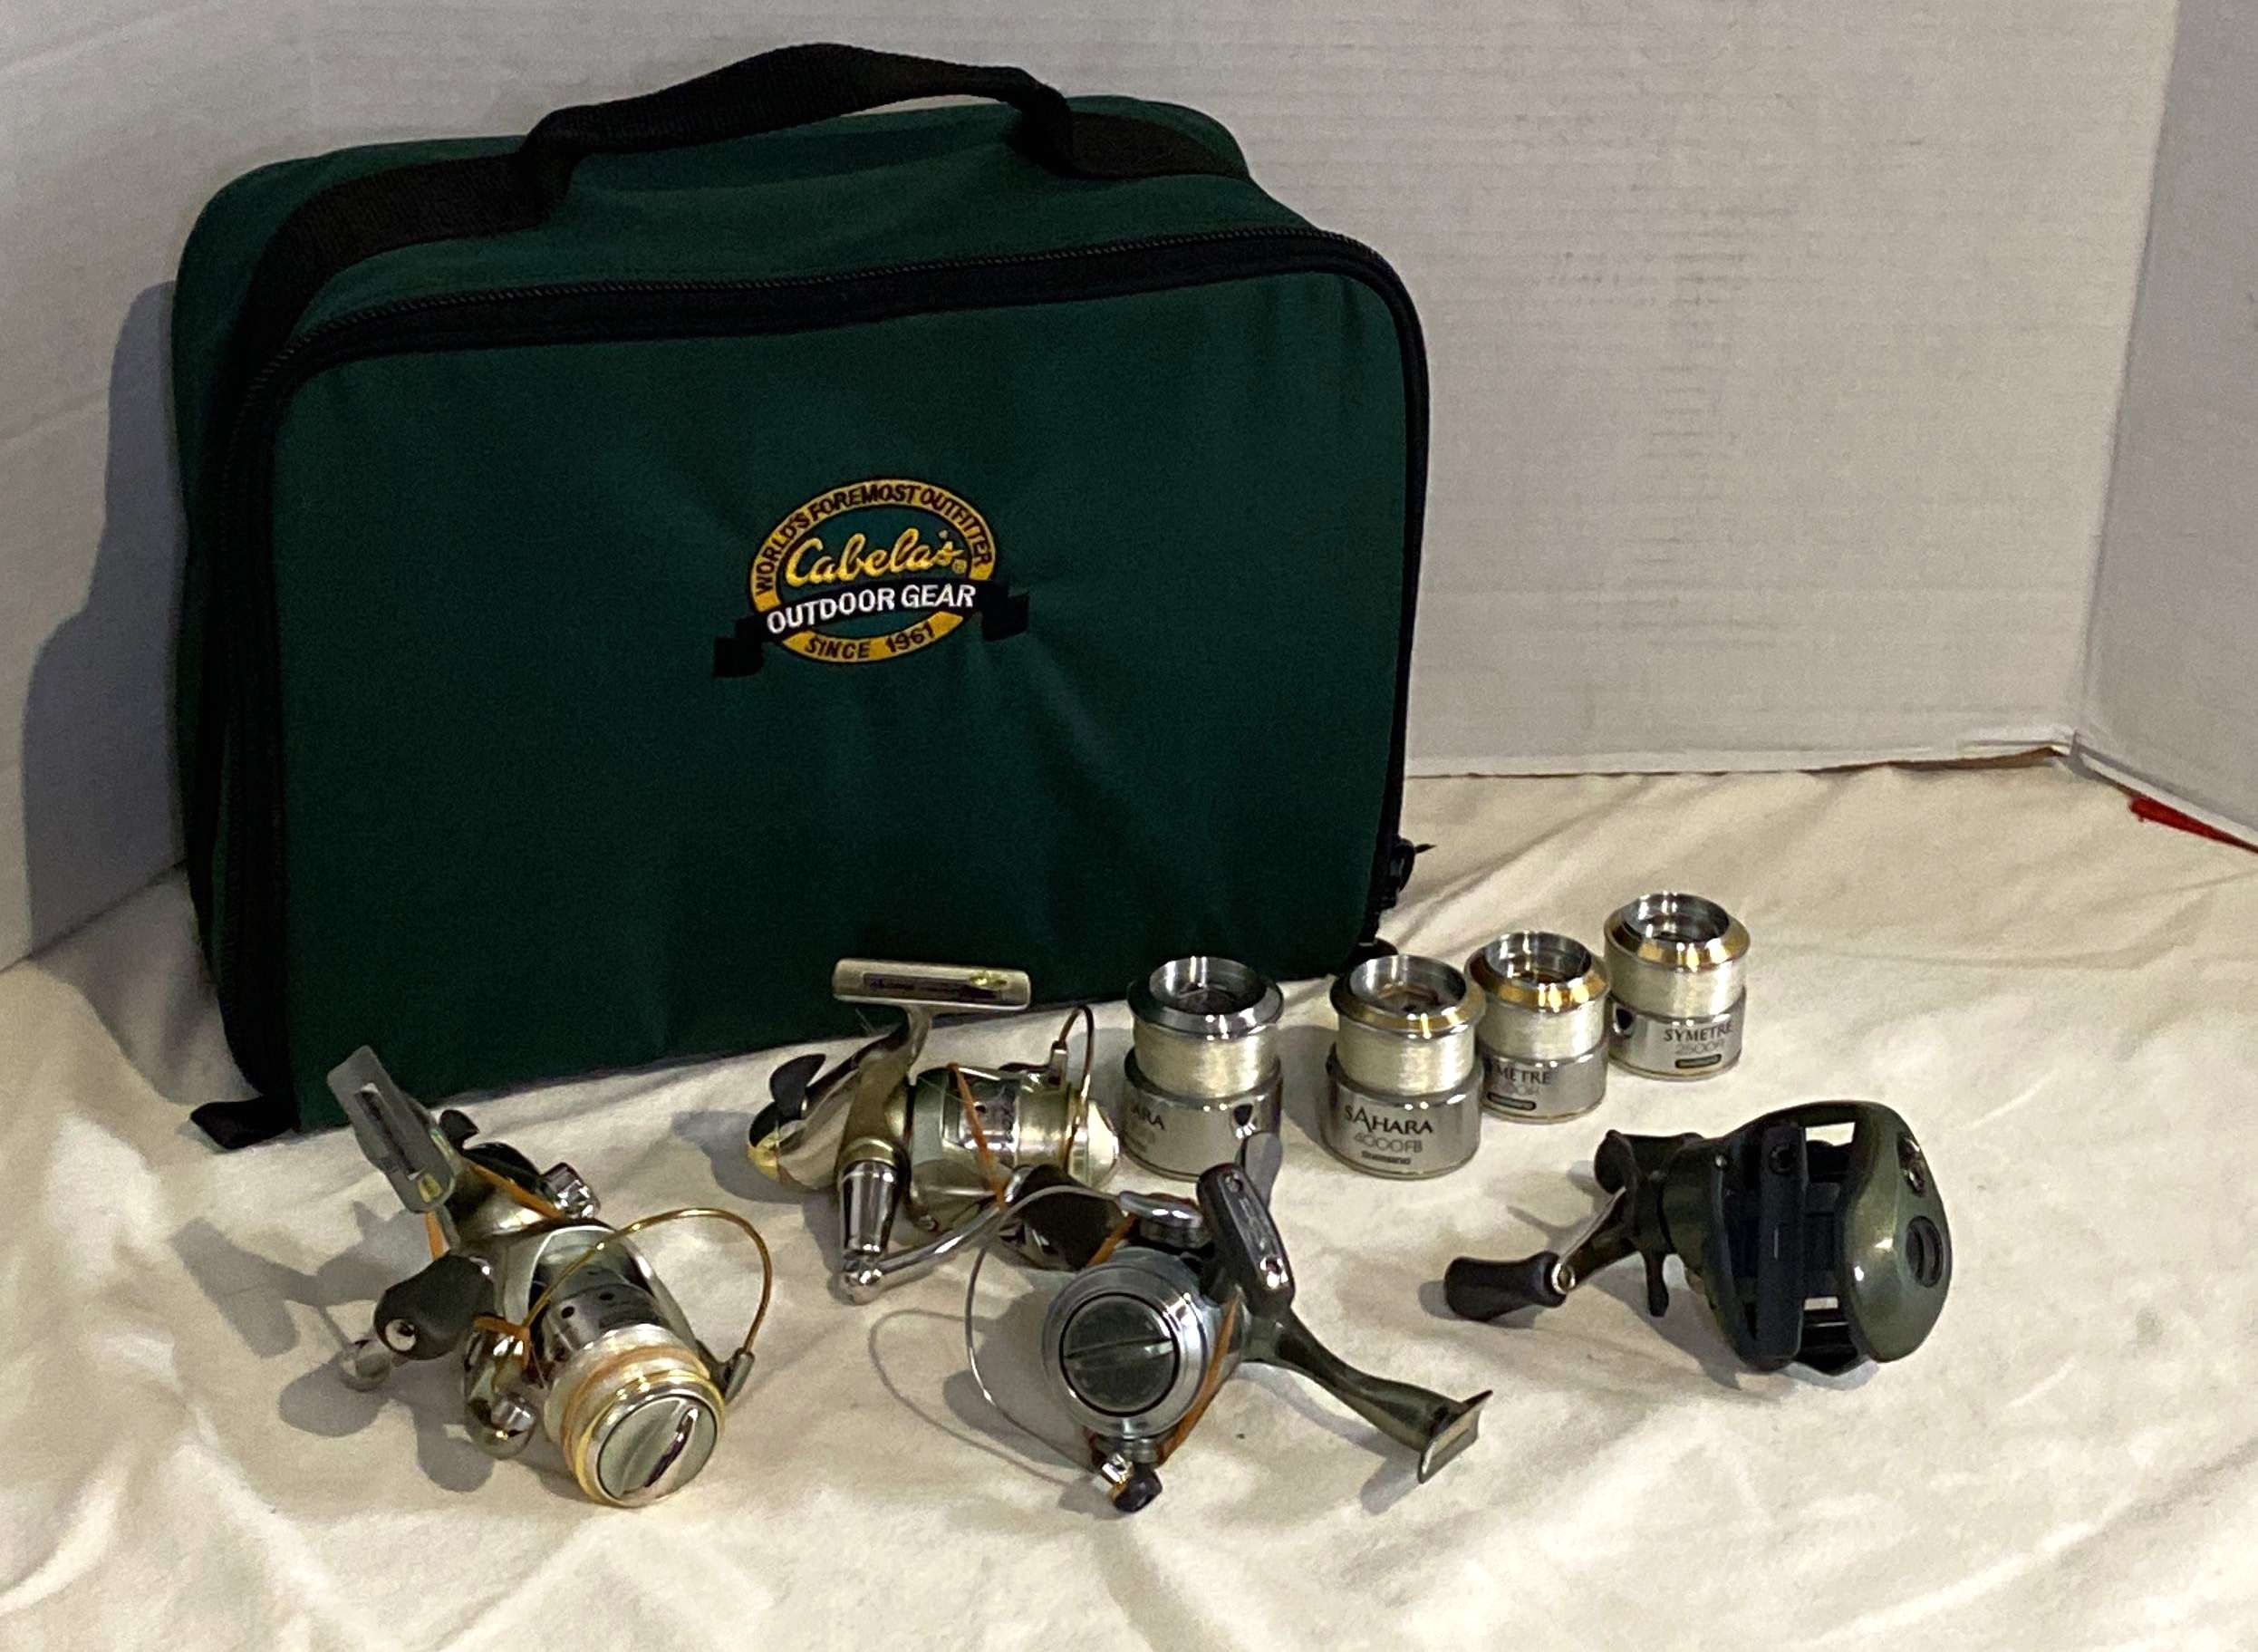 Fishing-Reels-And-Lines-In-Cabela-s-Case